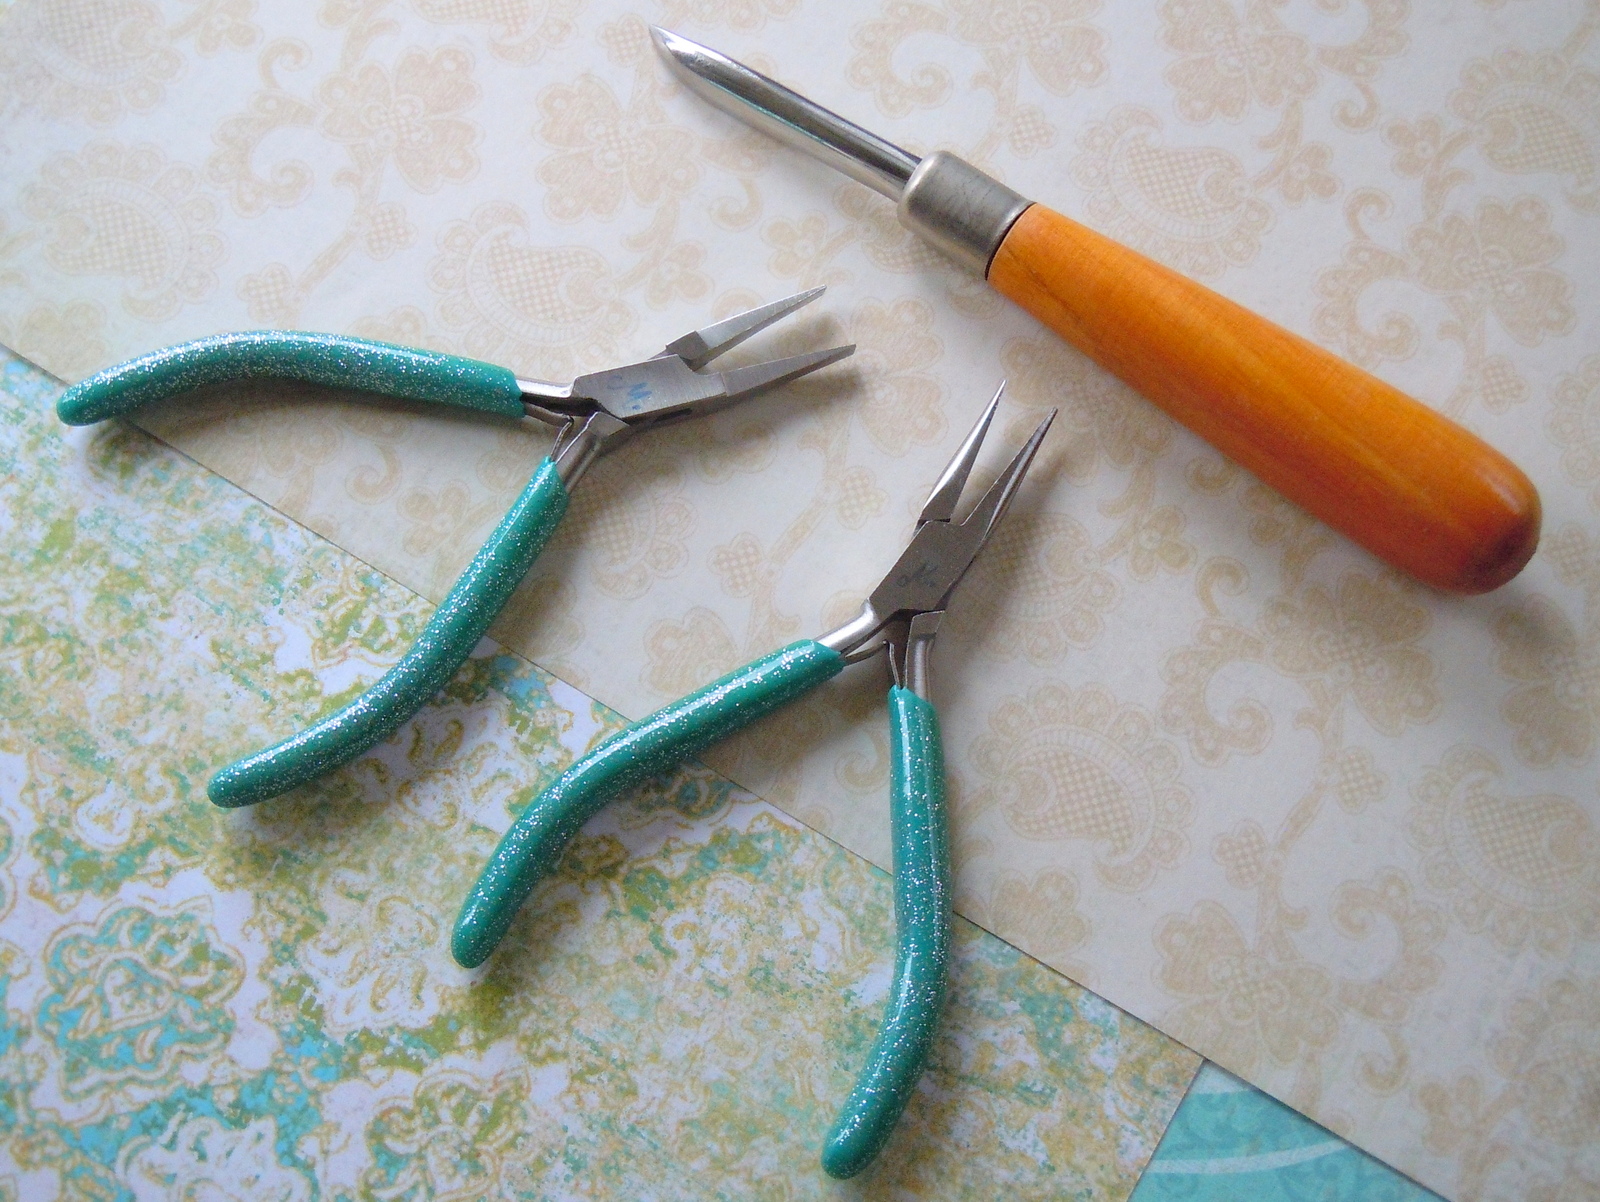 This jewelry-making project requires just three tools: flat-nose pliers, chain-nose pliers, and a steel burnisher.